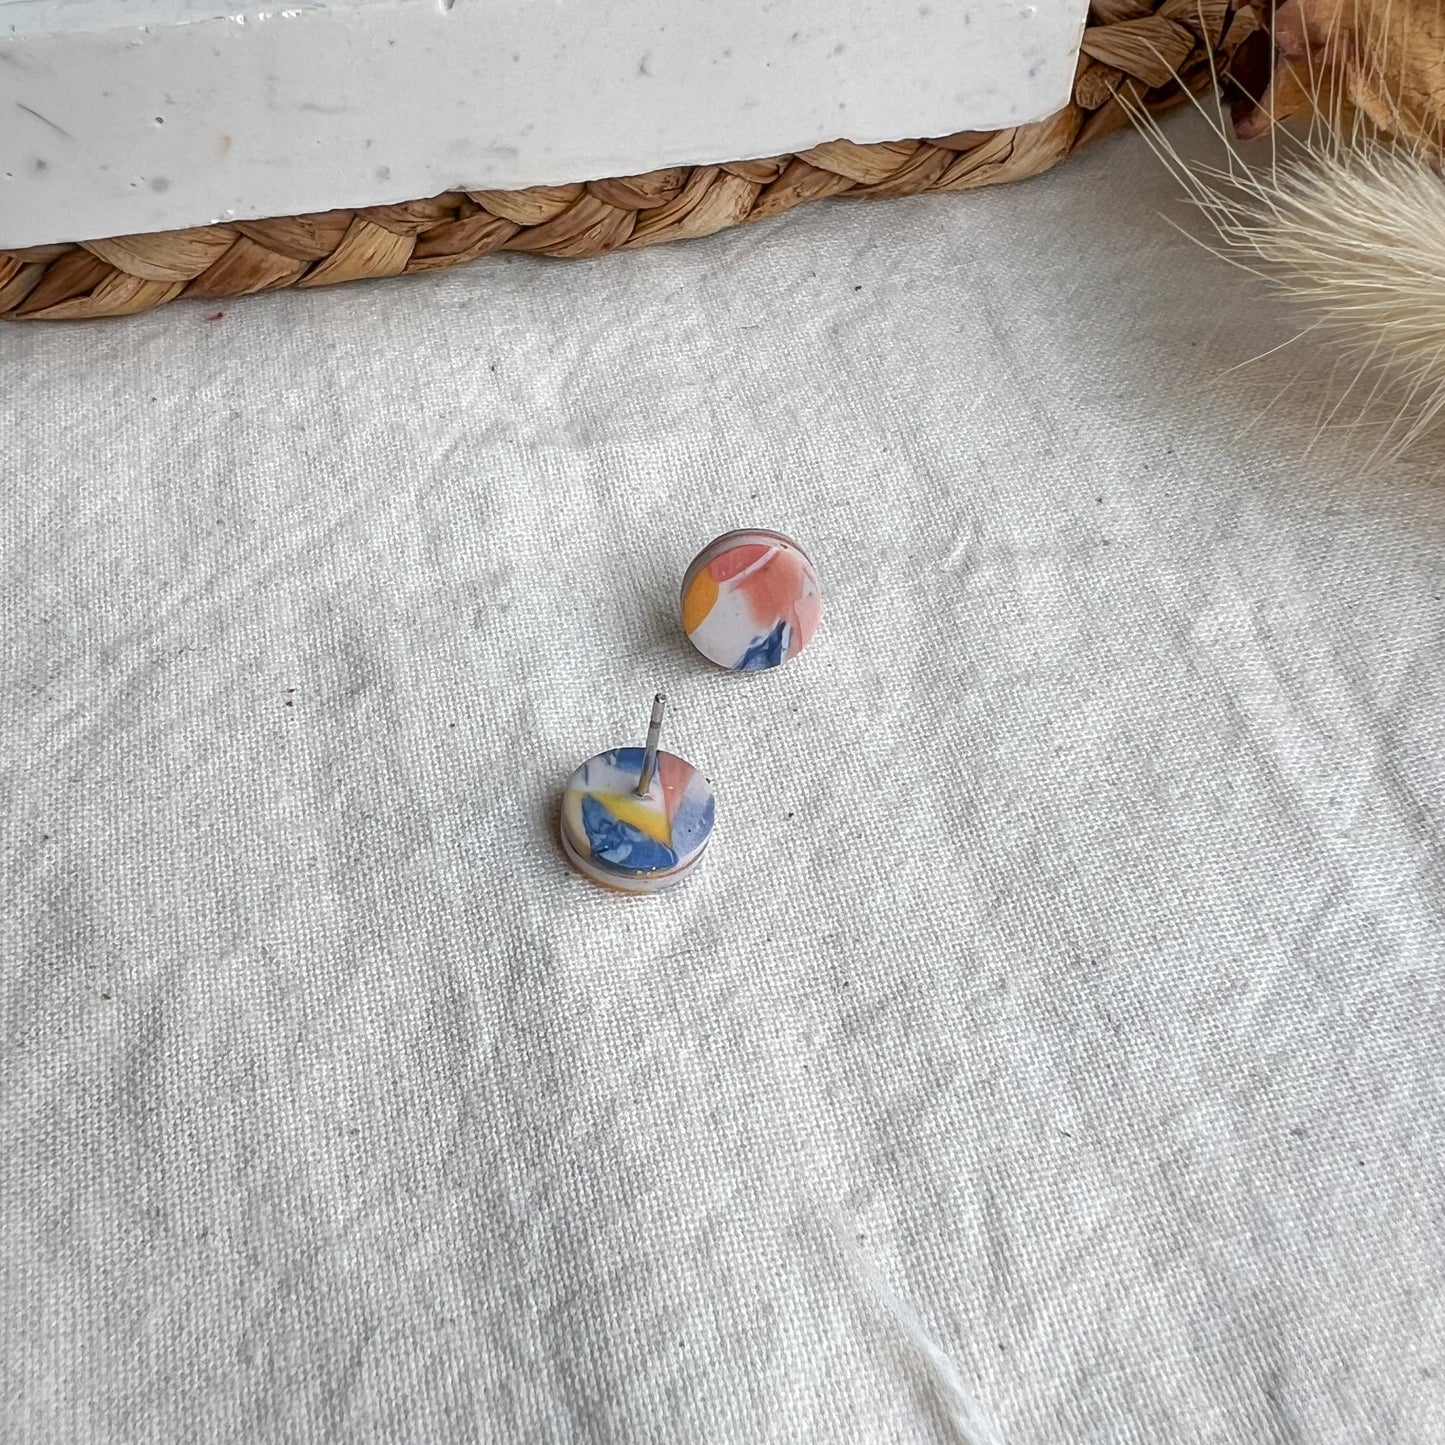 ROUND | Small round stud earrings in multicoloured cubist terrazzo